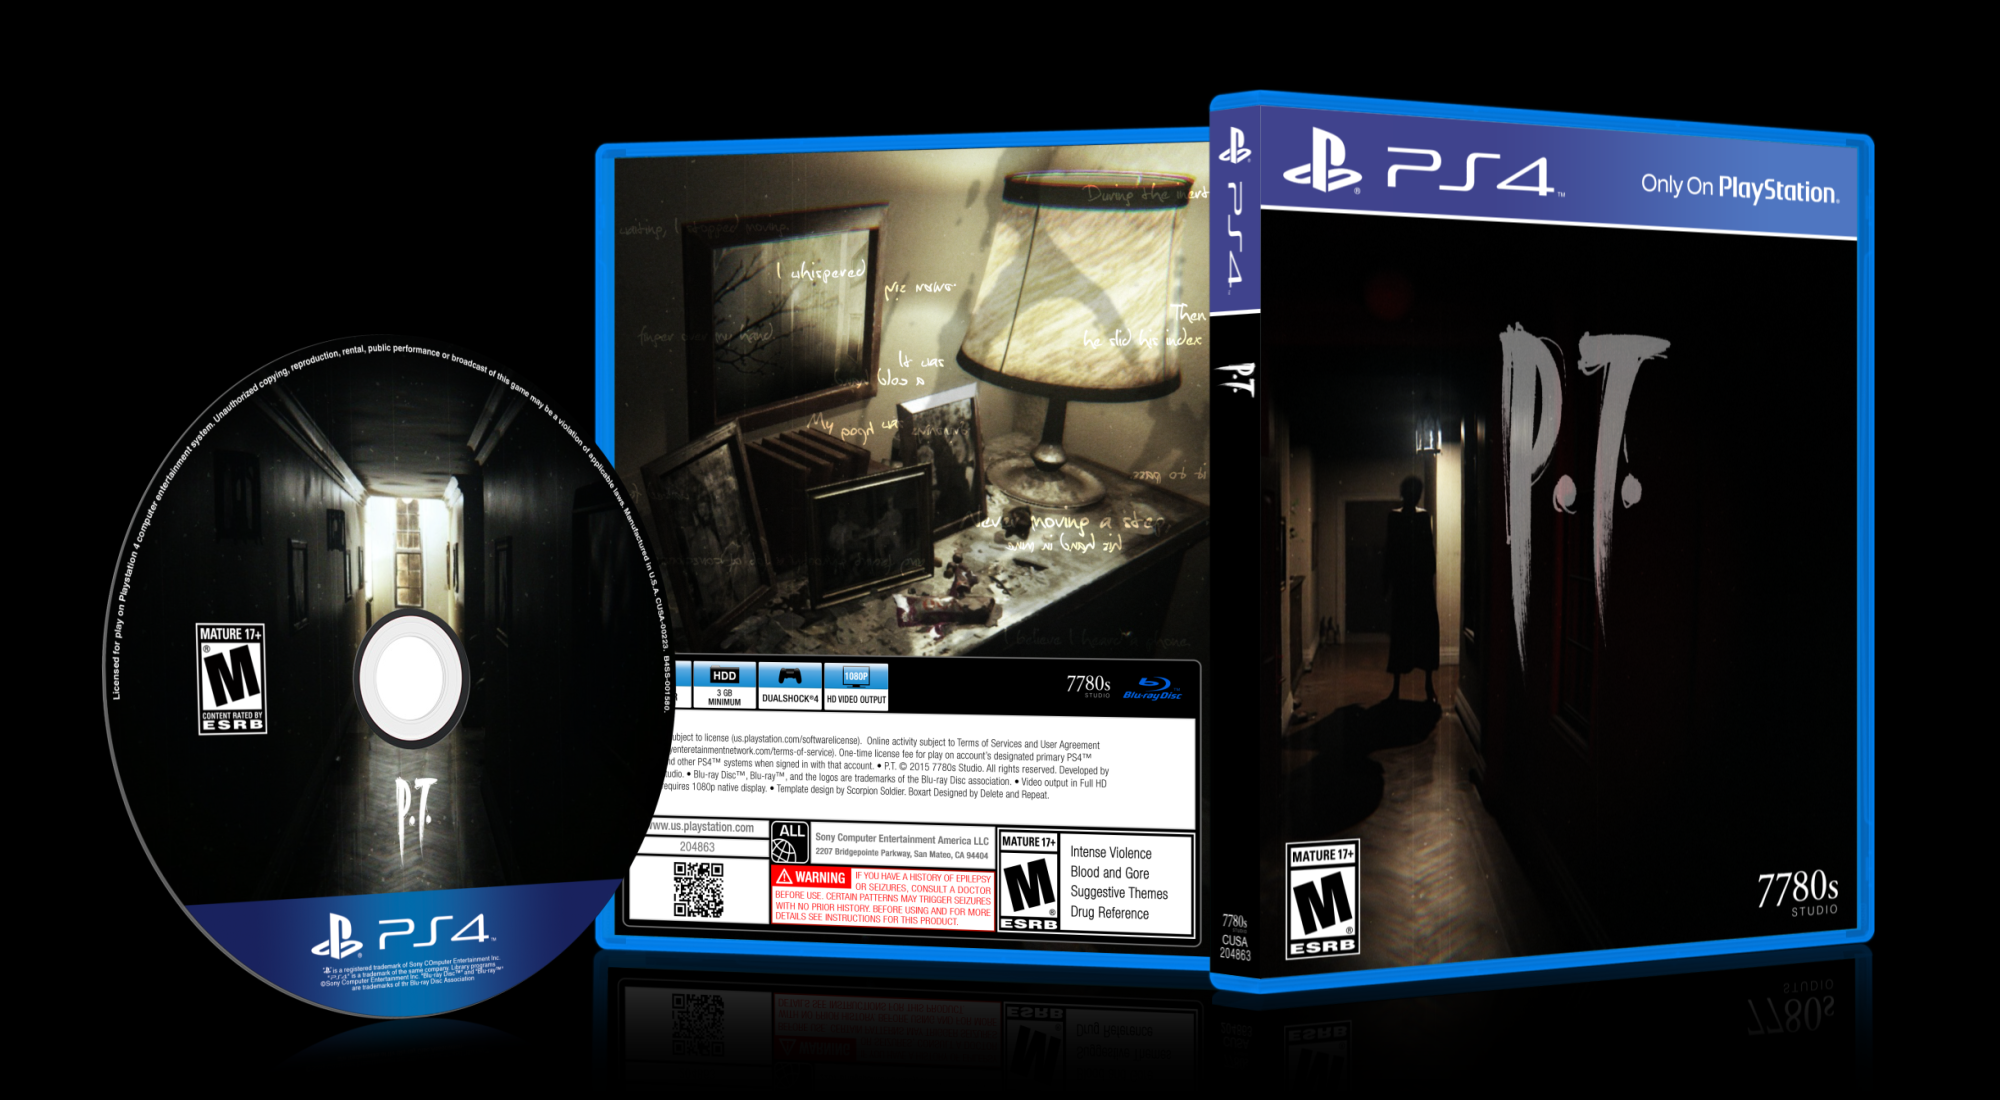 Silent Hills P.T. box cover